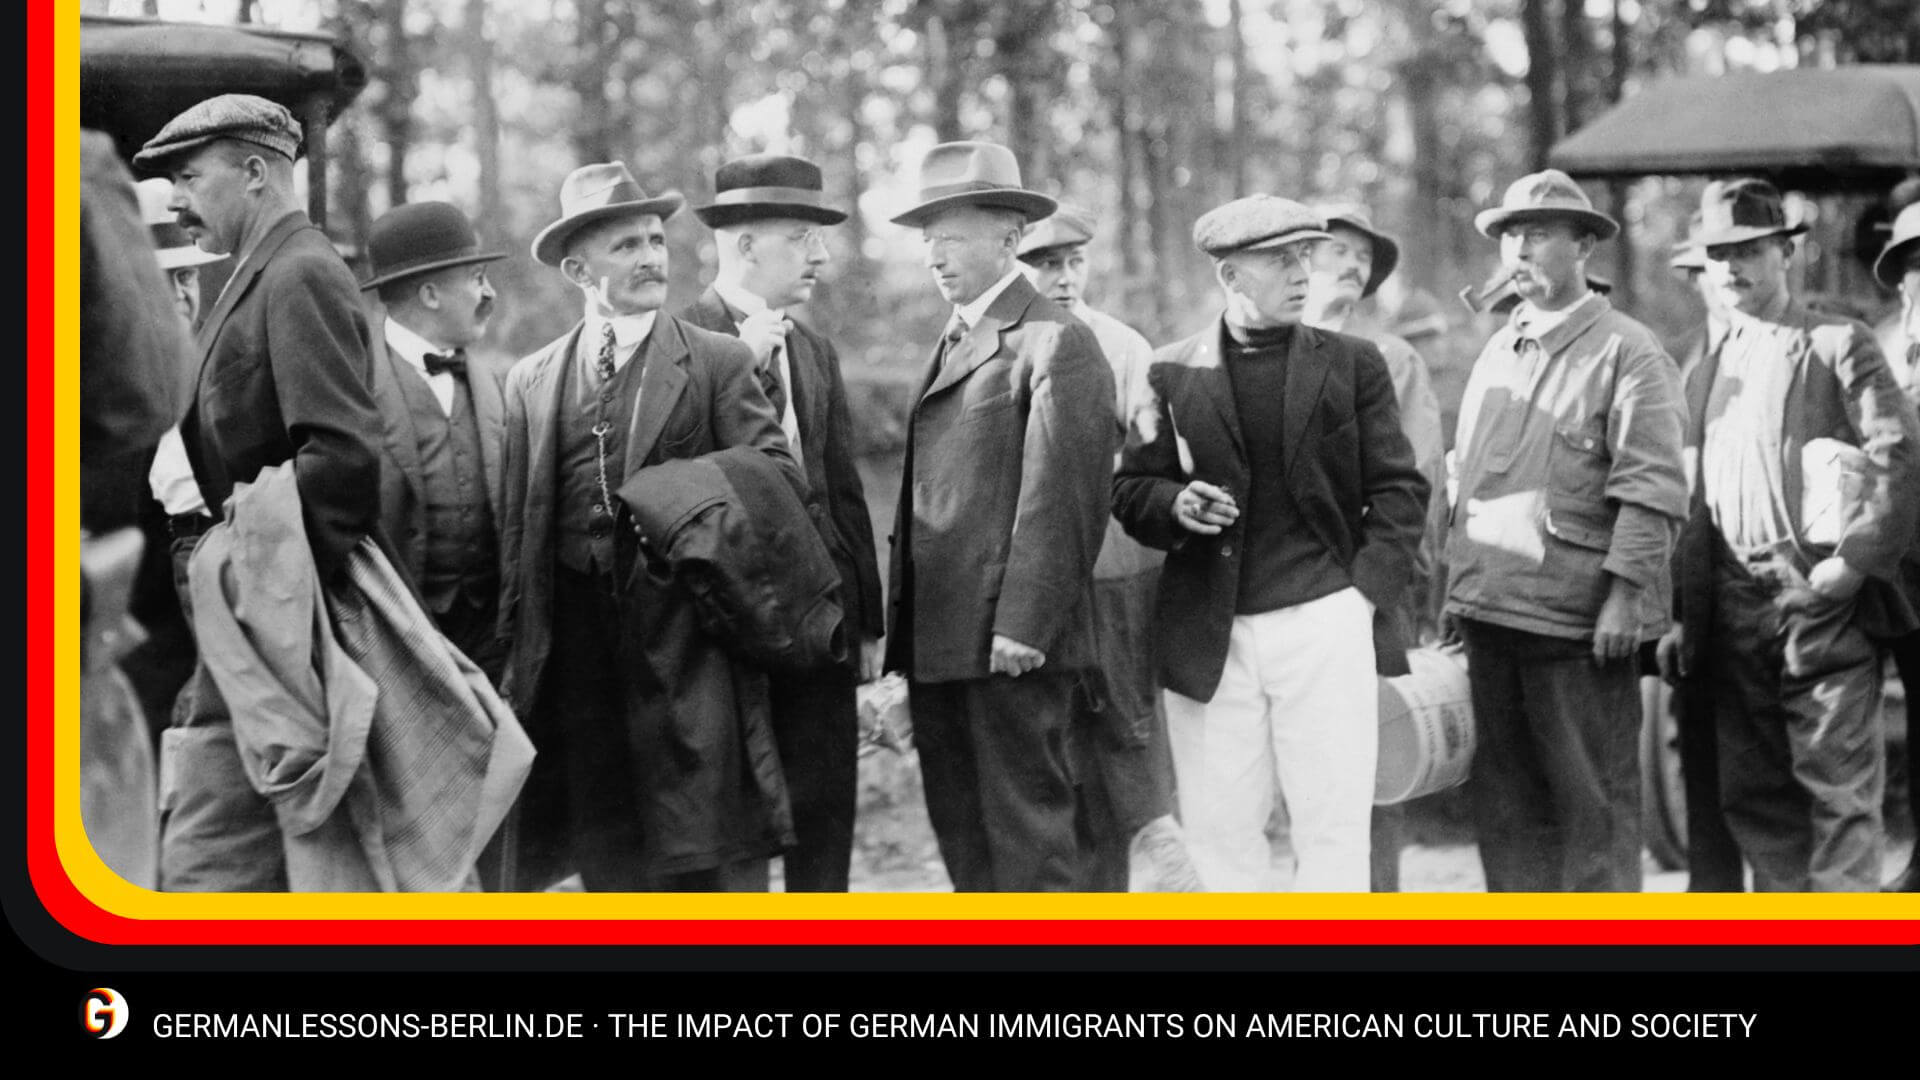 The Impact of German Immigrants on American Culture and Society